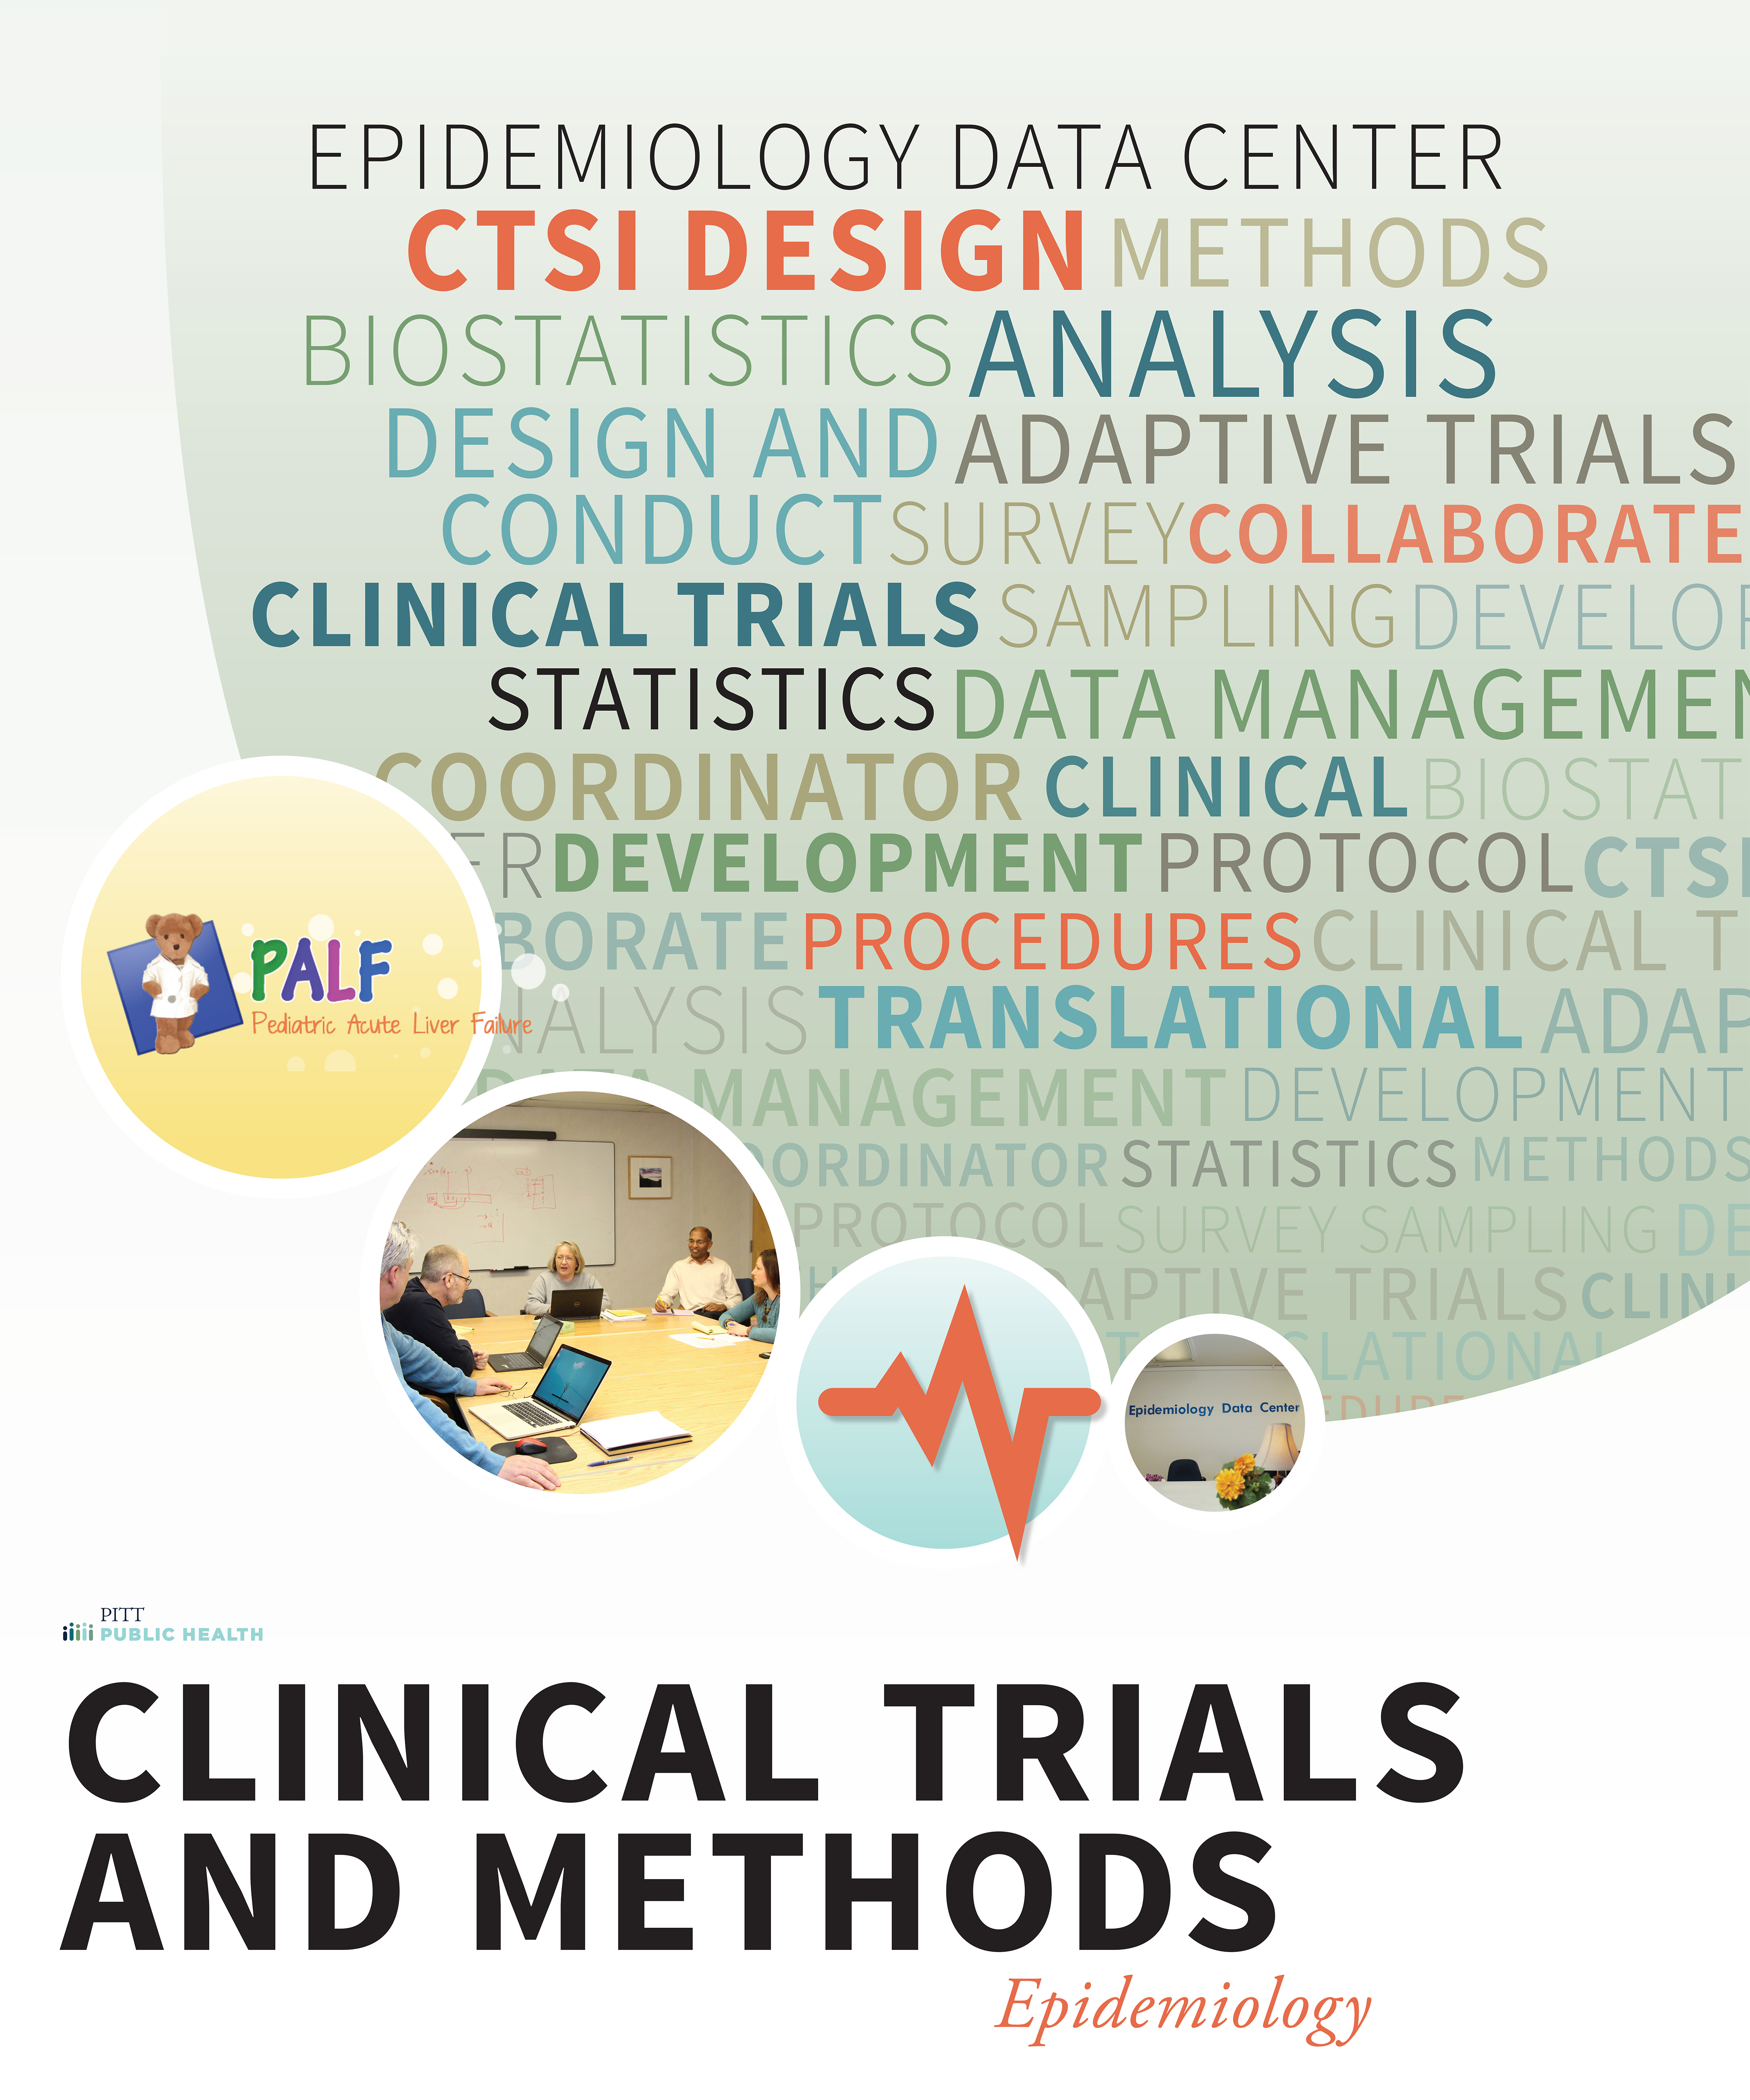 Graduate Clinical Research Programs